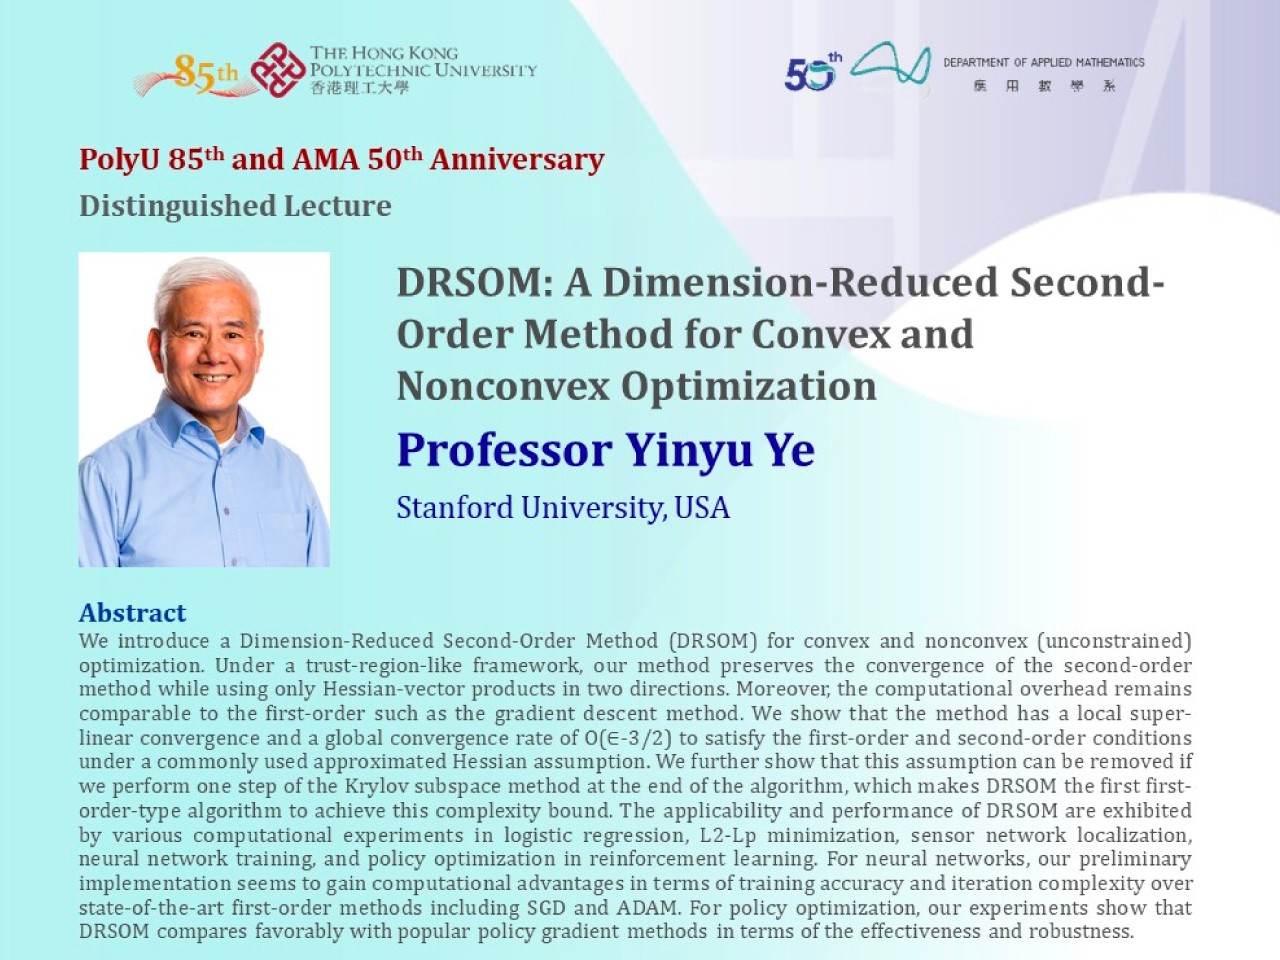 PolyU 85th and  AMA 50th anniversary distinguished lecture : DRSOM : a dimension-reduced second-order method for convex and nonconvex optimization